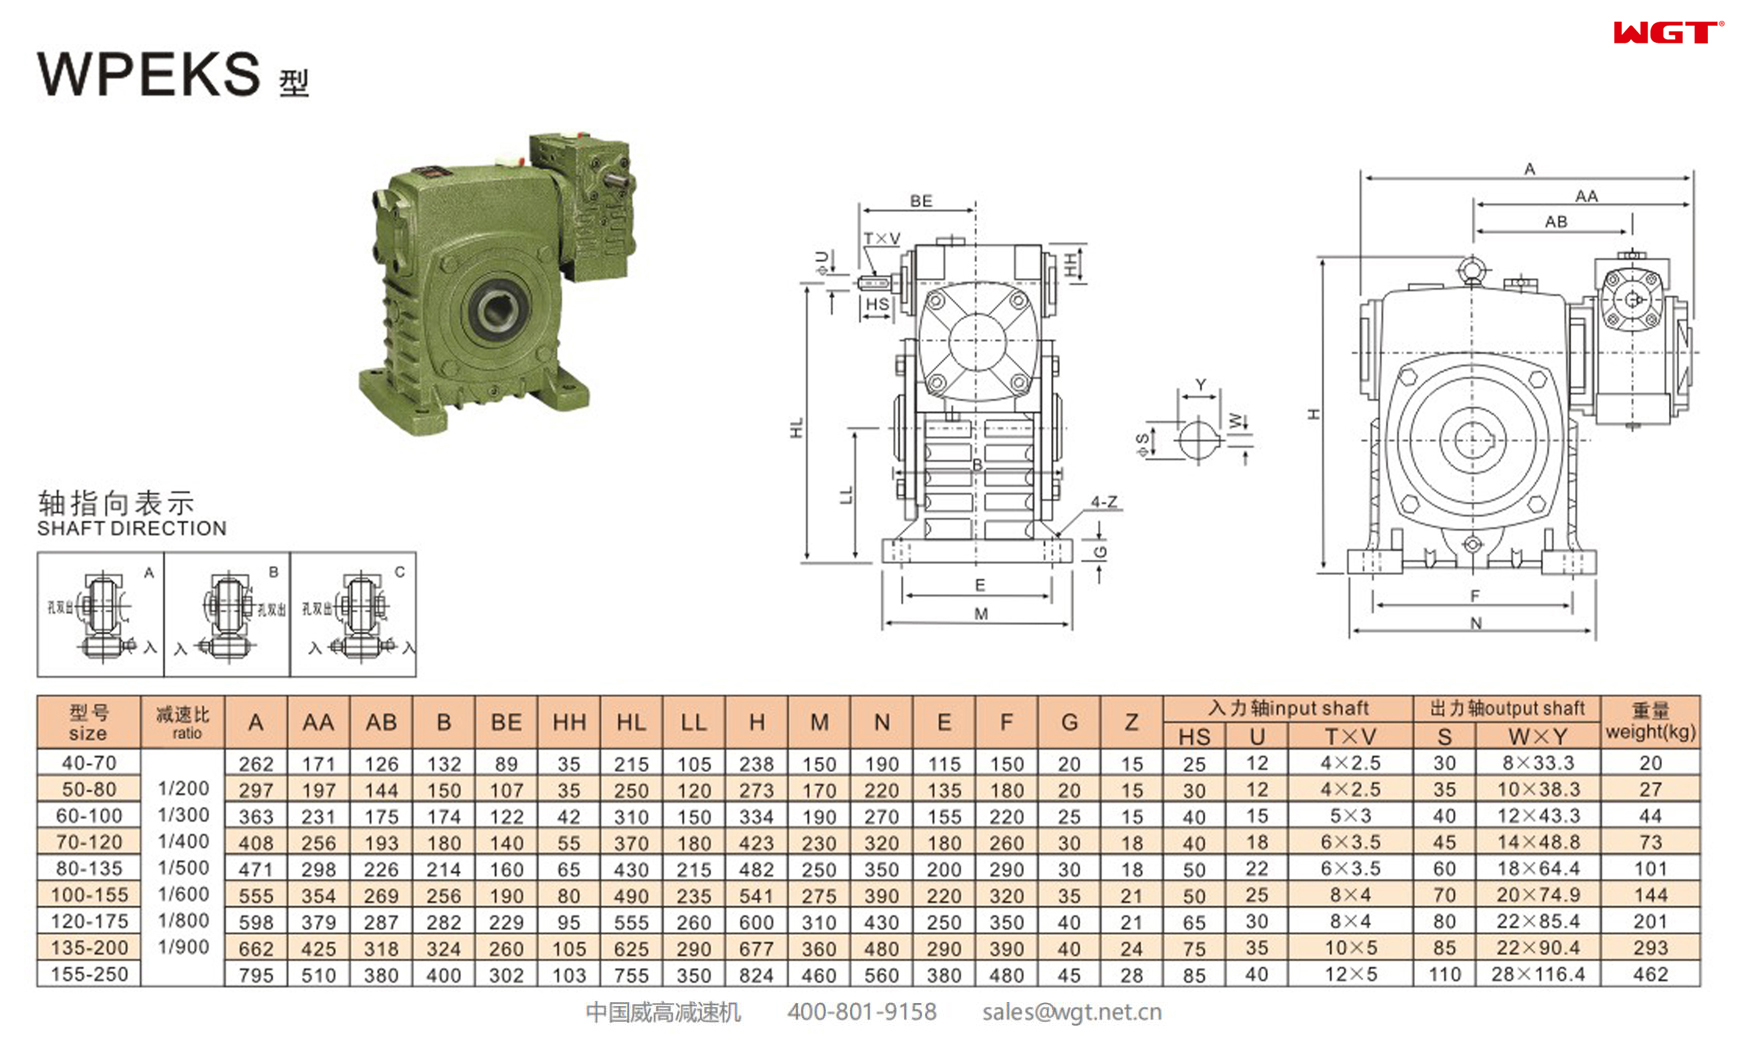 WPEKS100-155 Worm Gear Reducer DOUBLE SPEED REDUCER